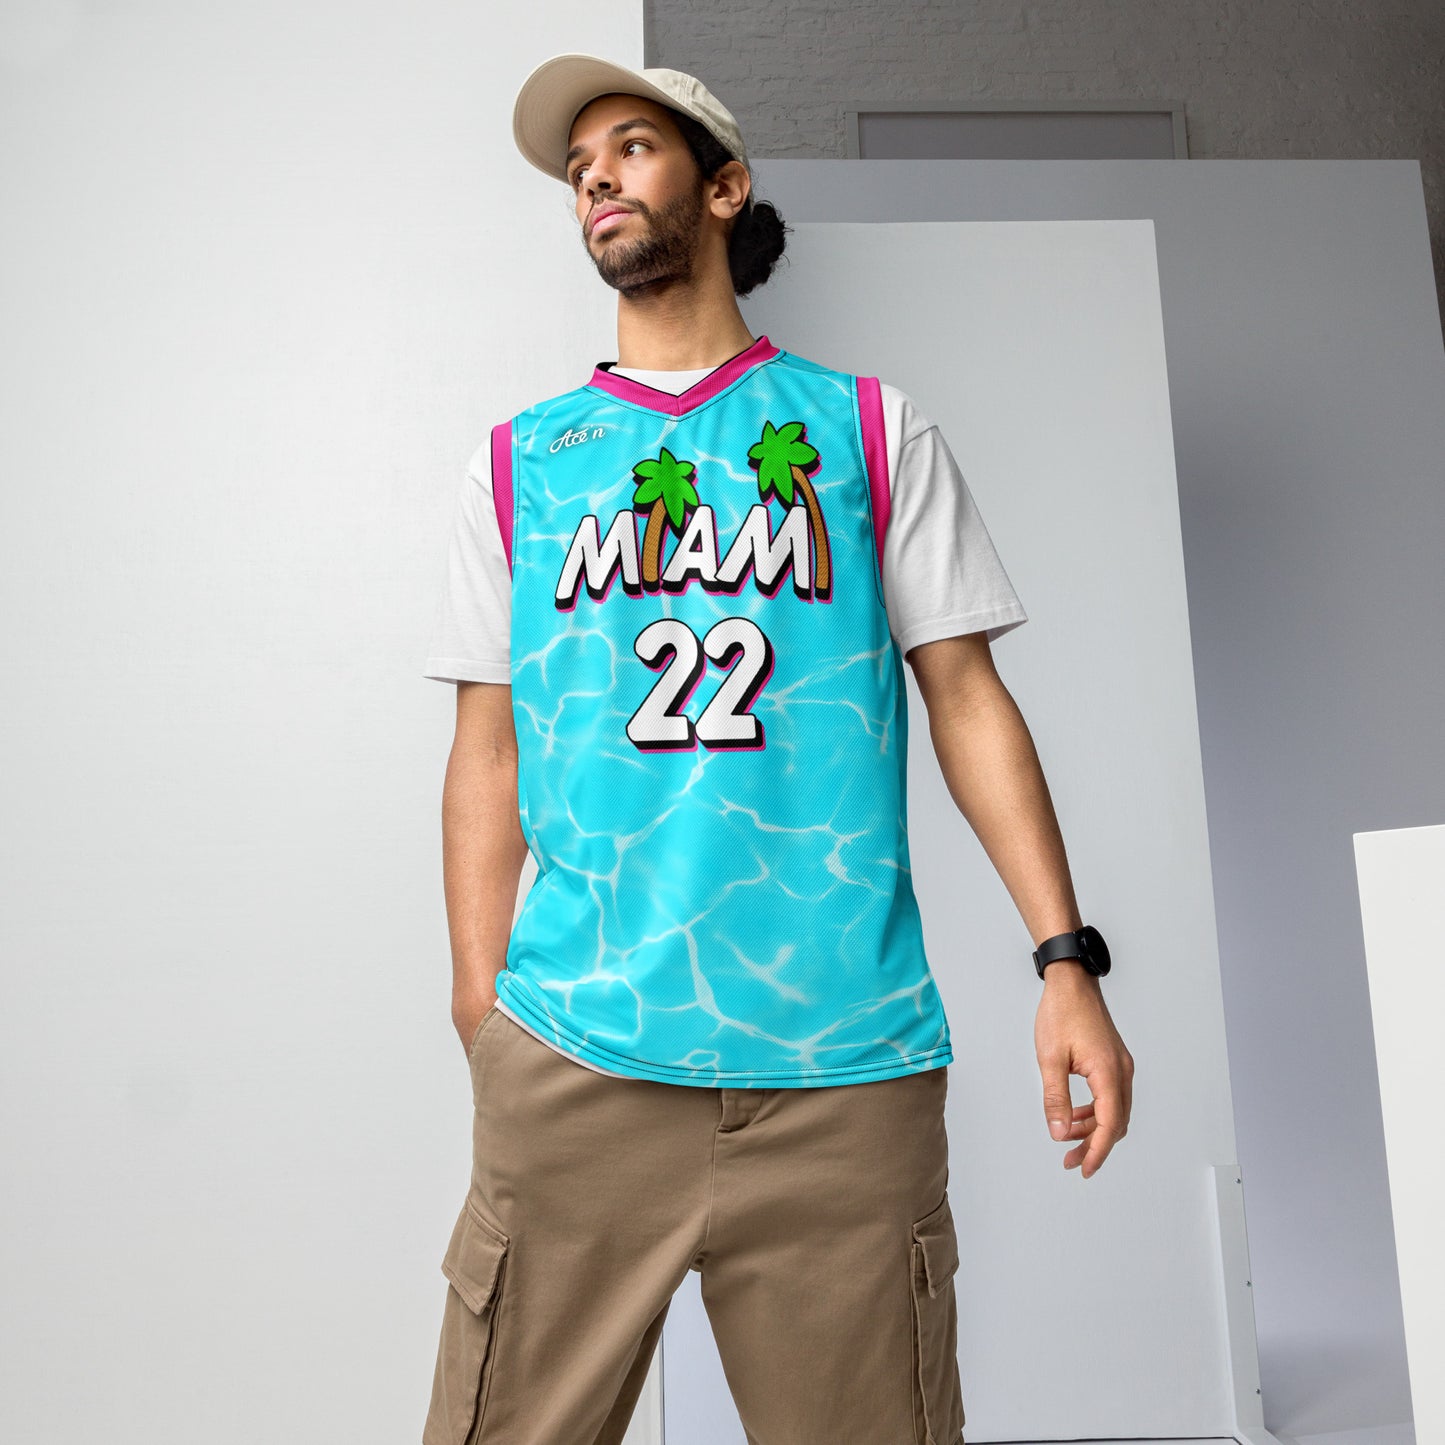 Ace'n "Miami" Jersey | Butler/#22